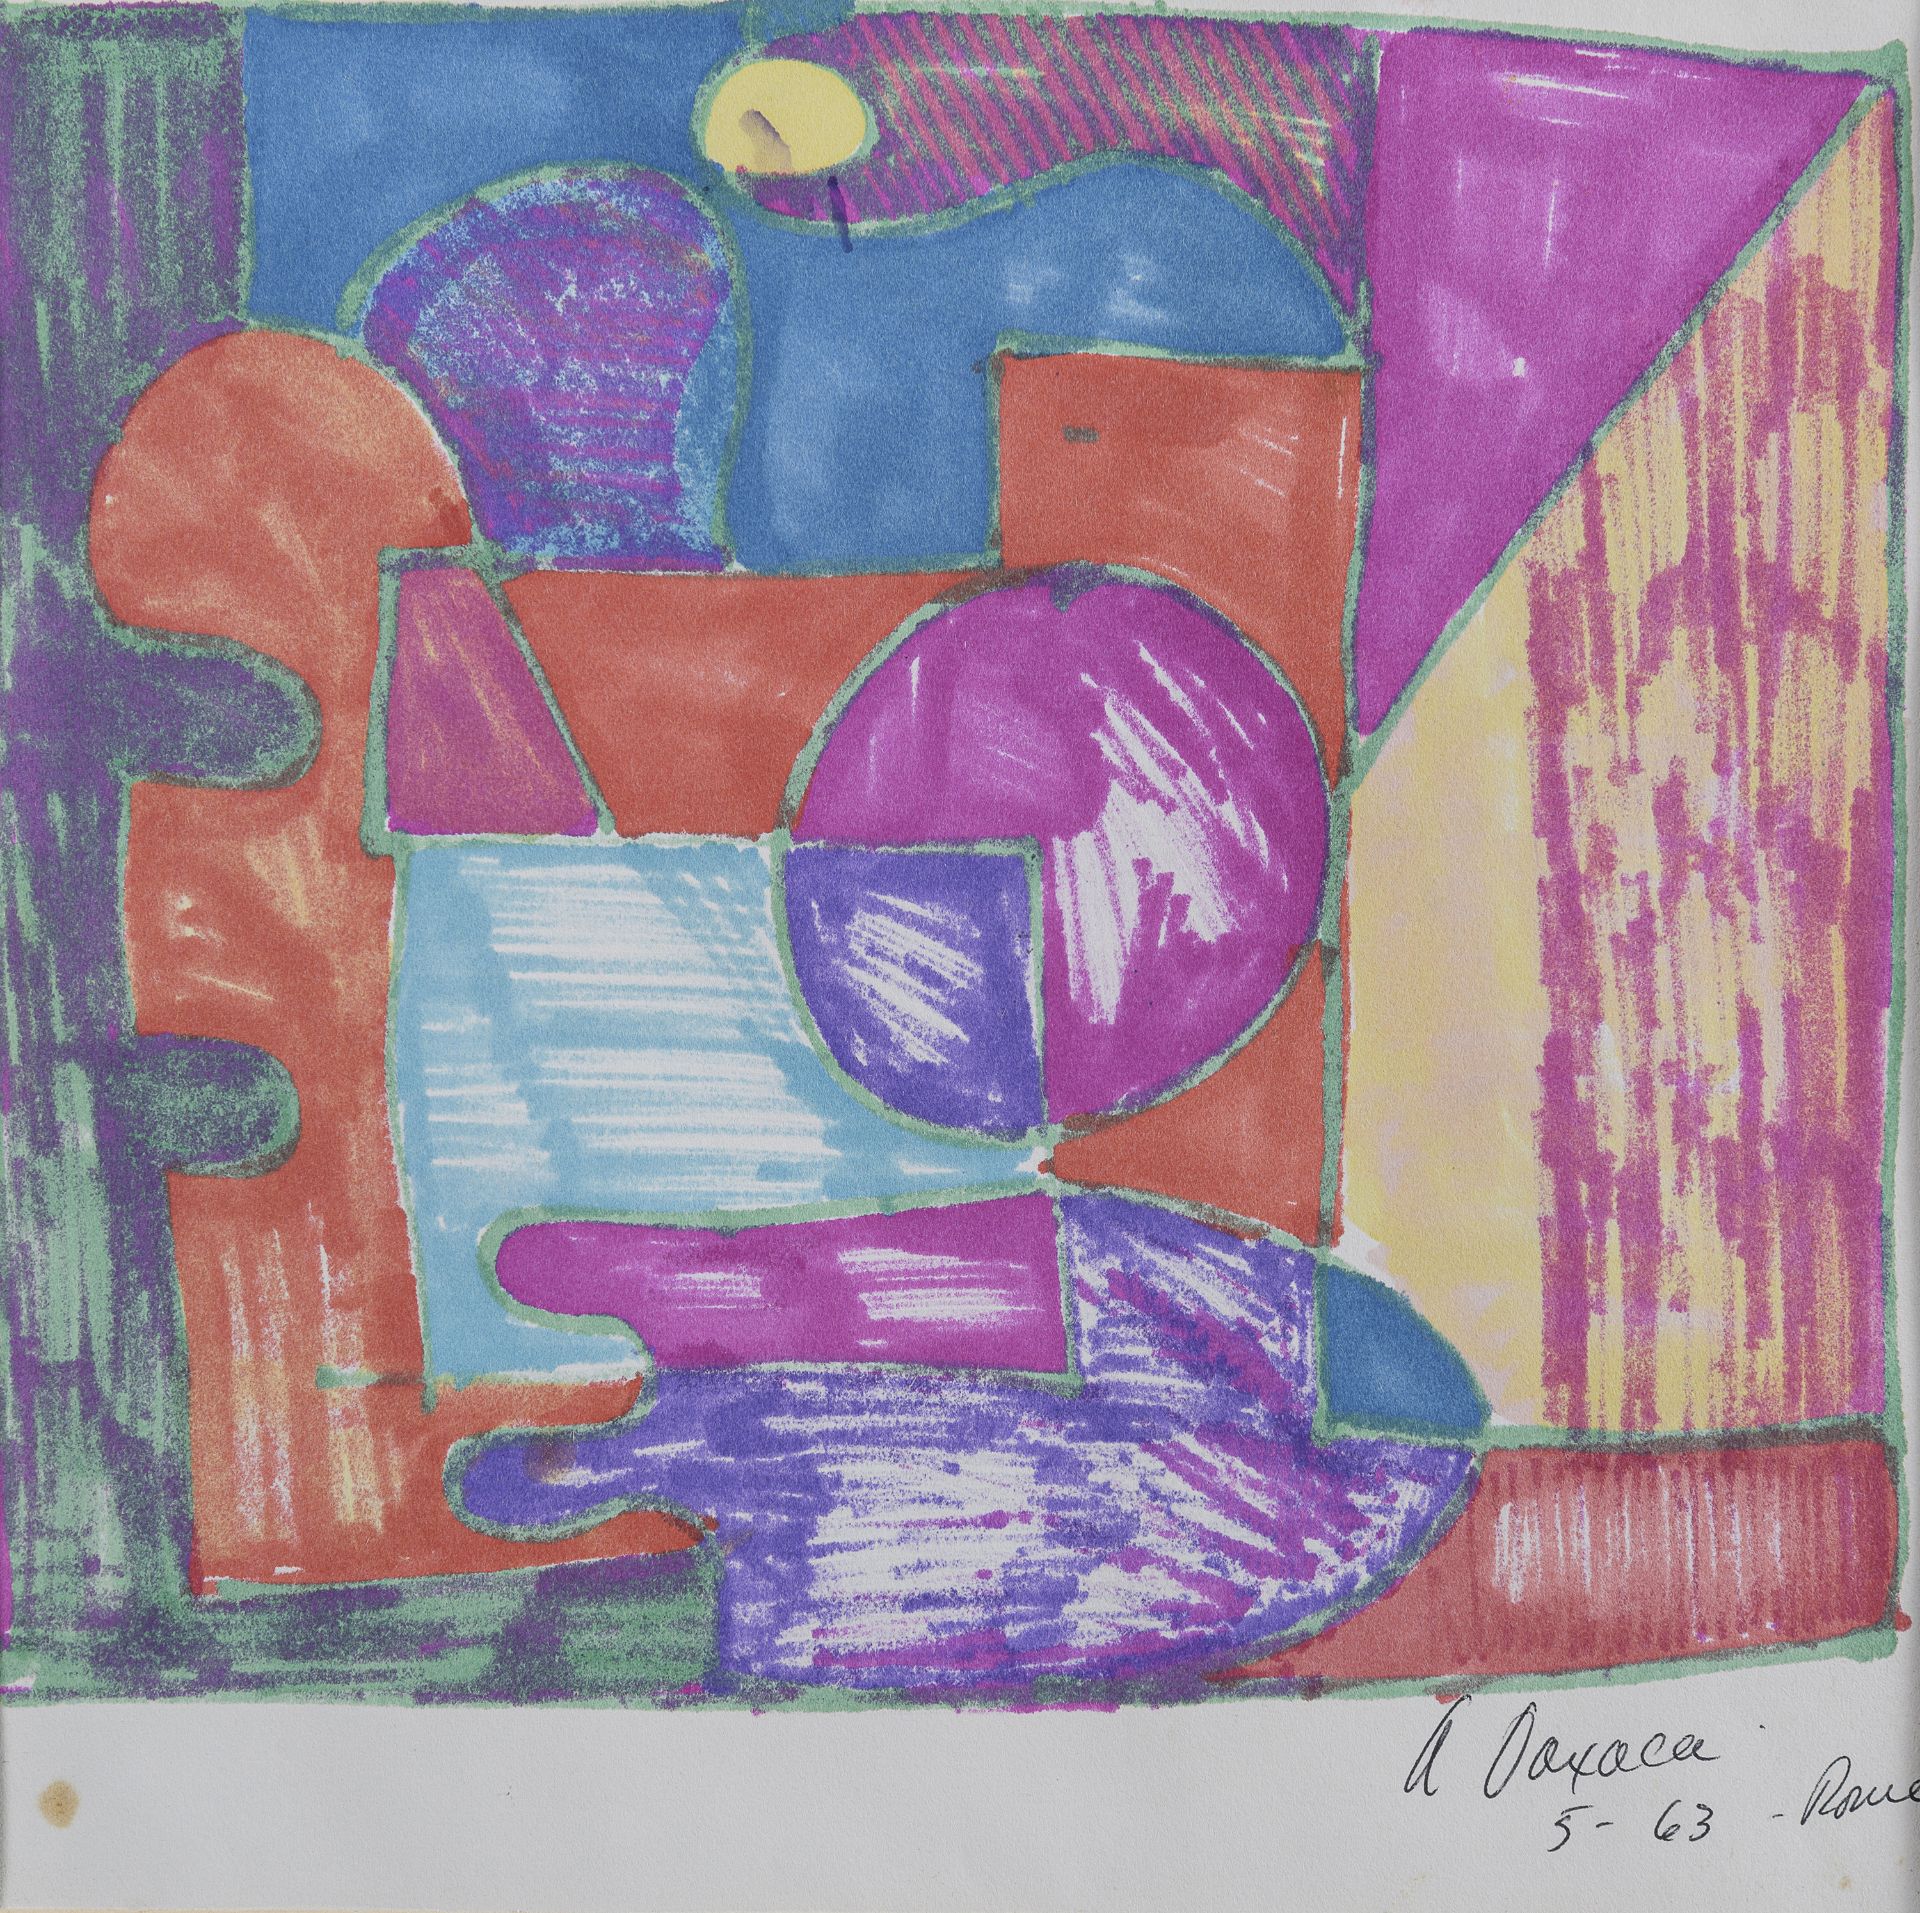 ABSTRACT FELT PEN DRAWING BY ANTHONY QUINN 1963